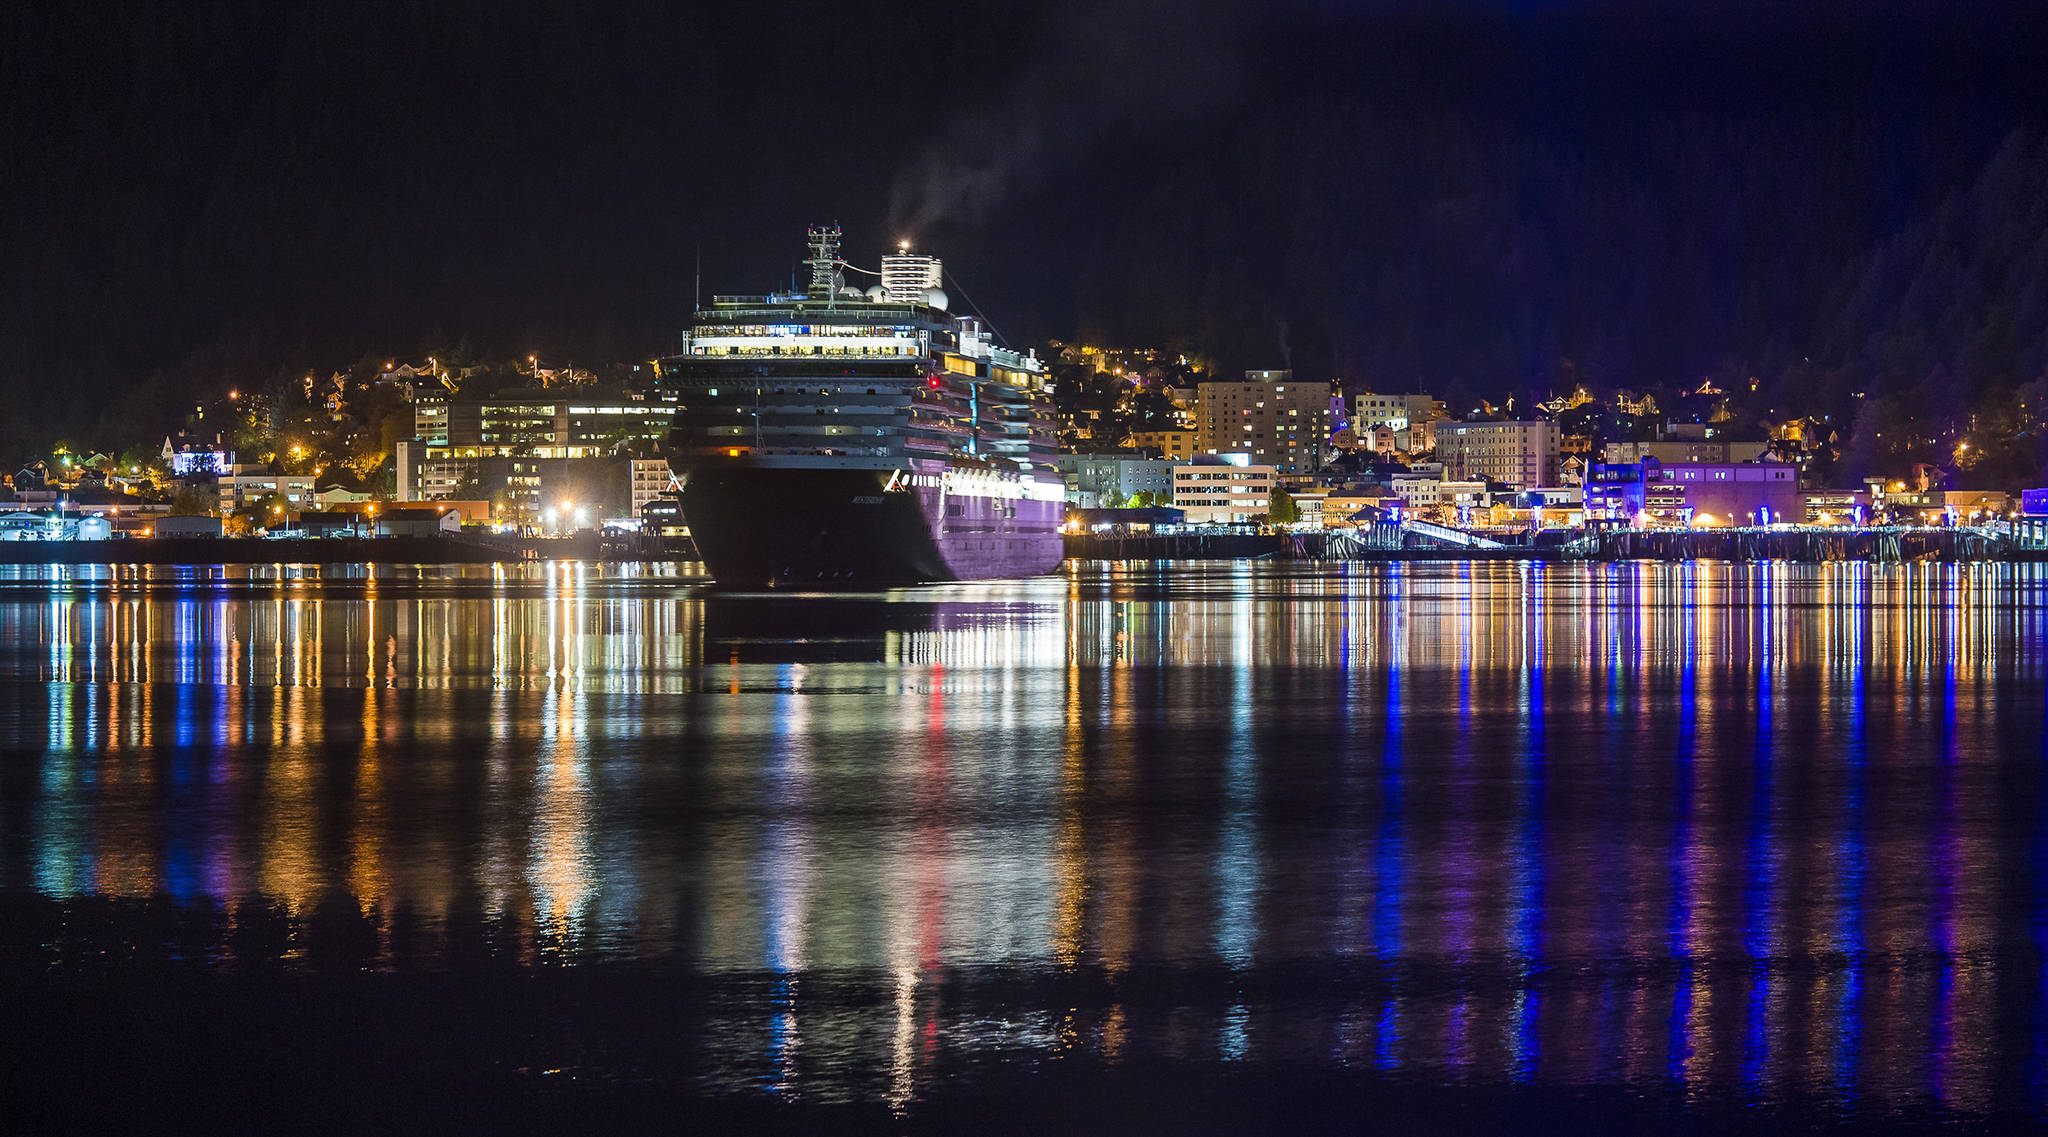 The Holland America Line cruise ship Westerdam slips out of Juneau’s downtown harbor just before 11 p.m. on Tuesday, Oct. 2, 2018. The Norwegian Pearl also visited Tuesday, the last day of the season. (Michael Penn | Juneau Empire)